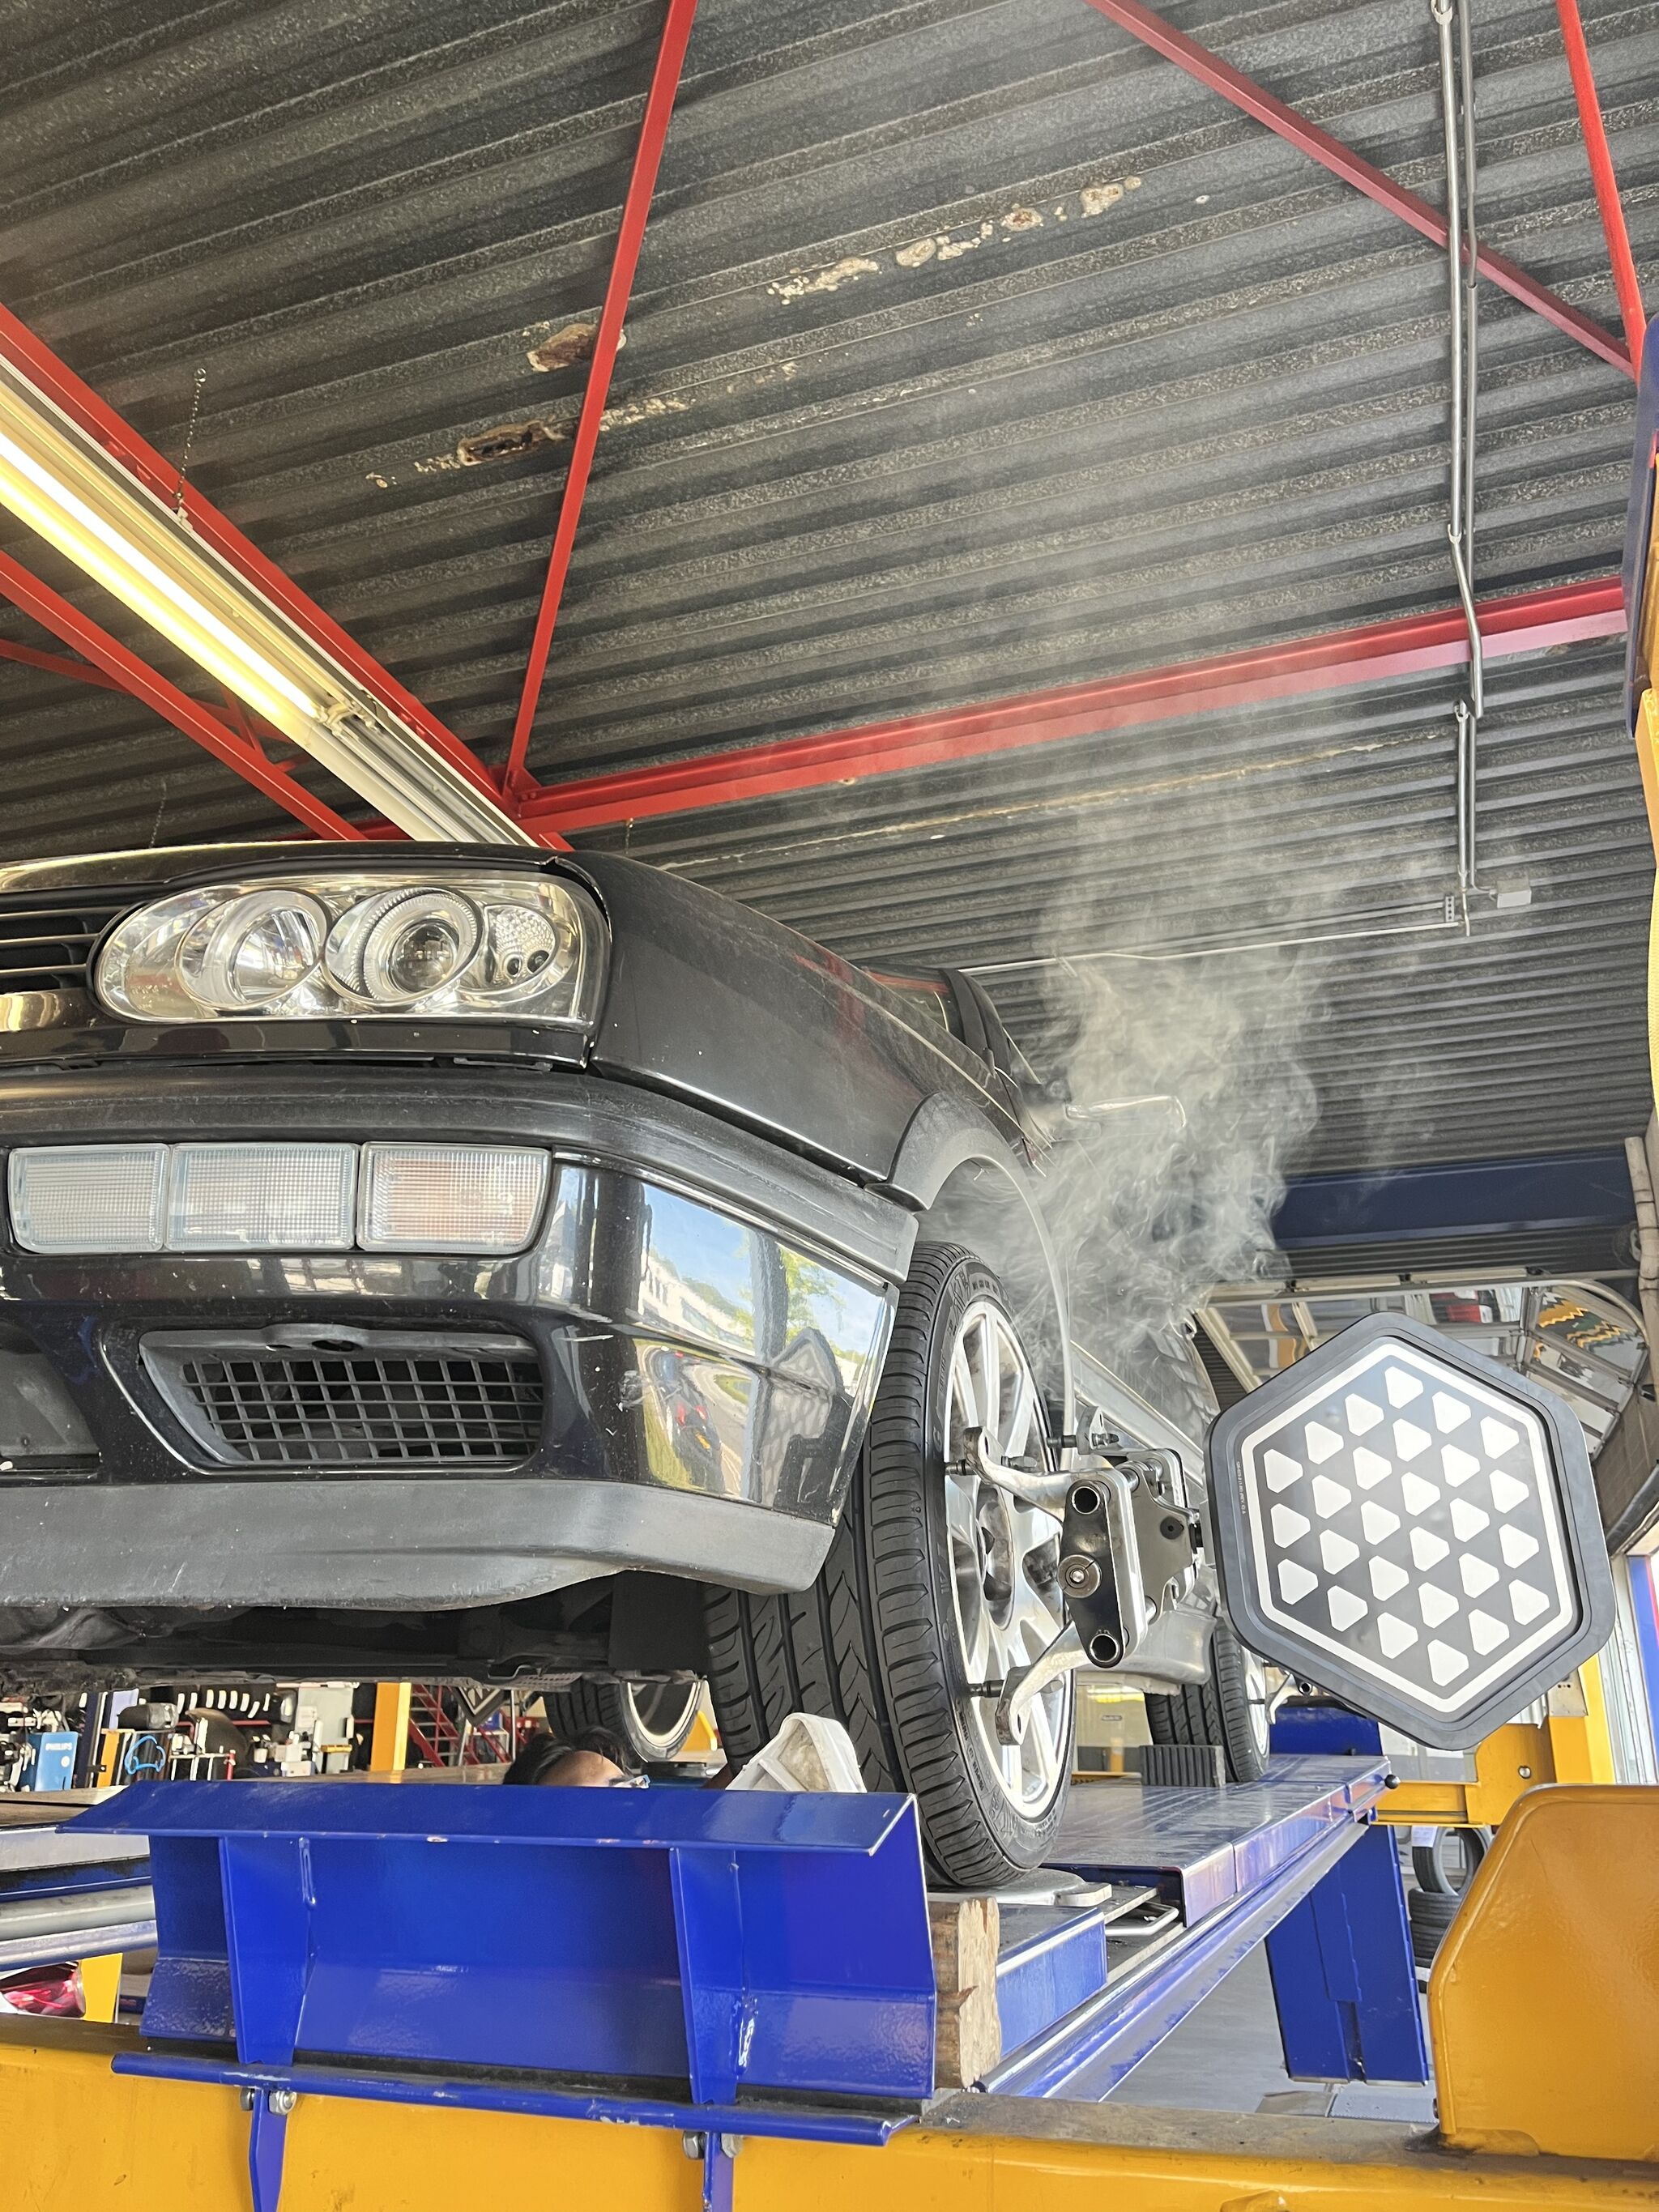 The mechanic doing the wheel alignment was cursing like a sailor â€” and applying the necessary heat.